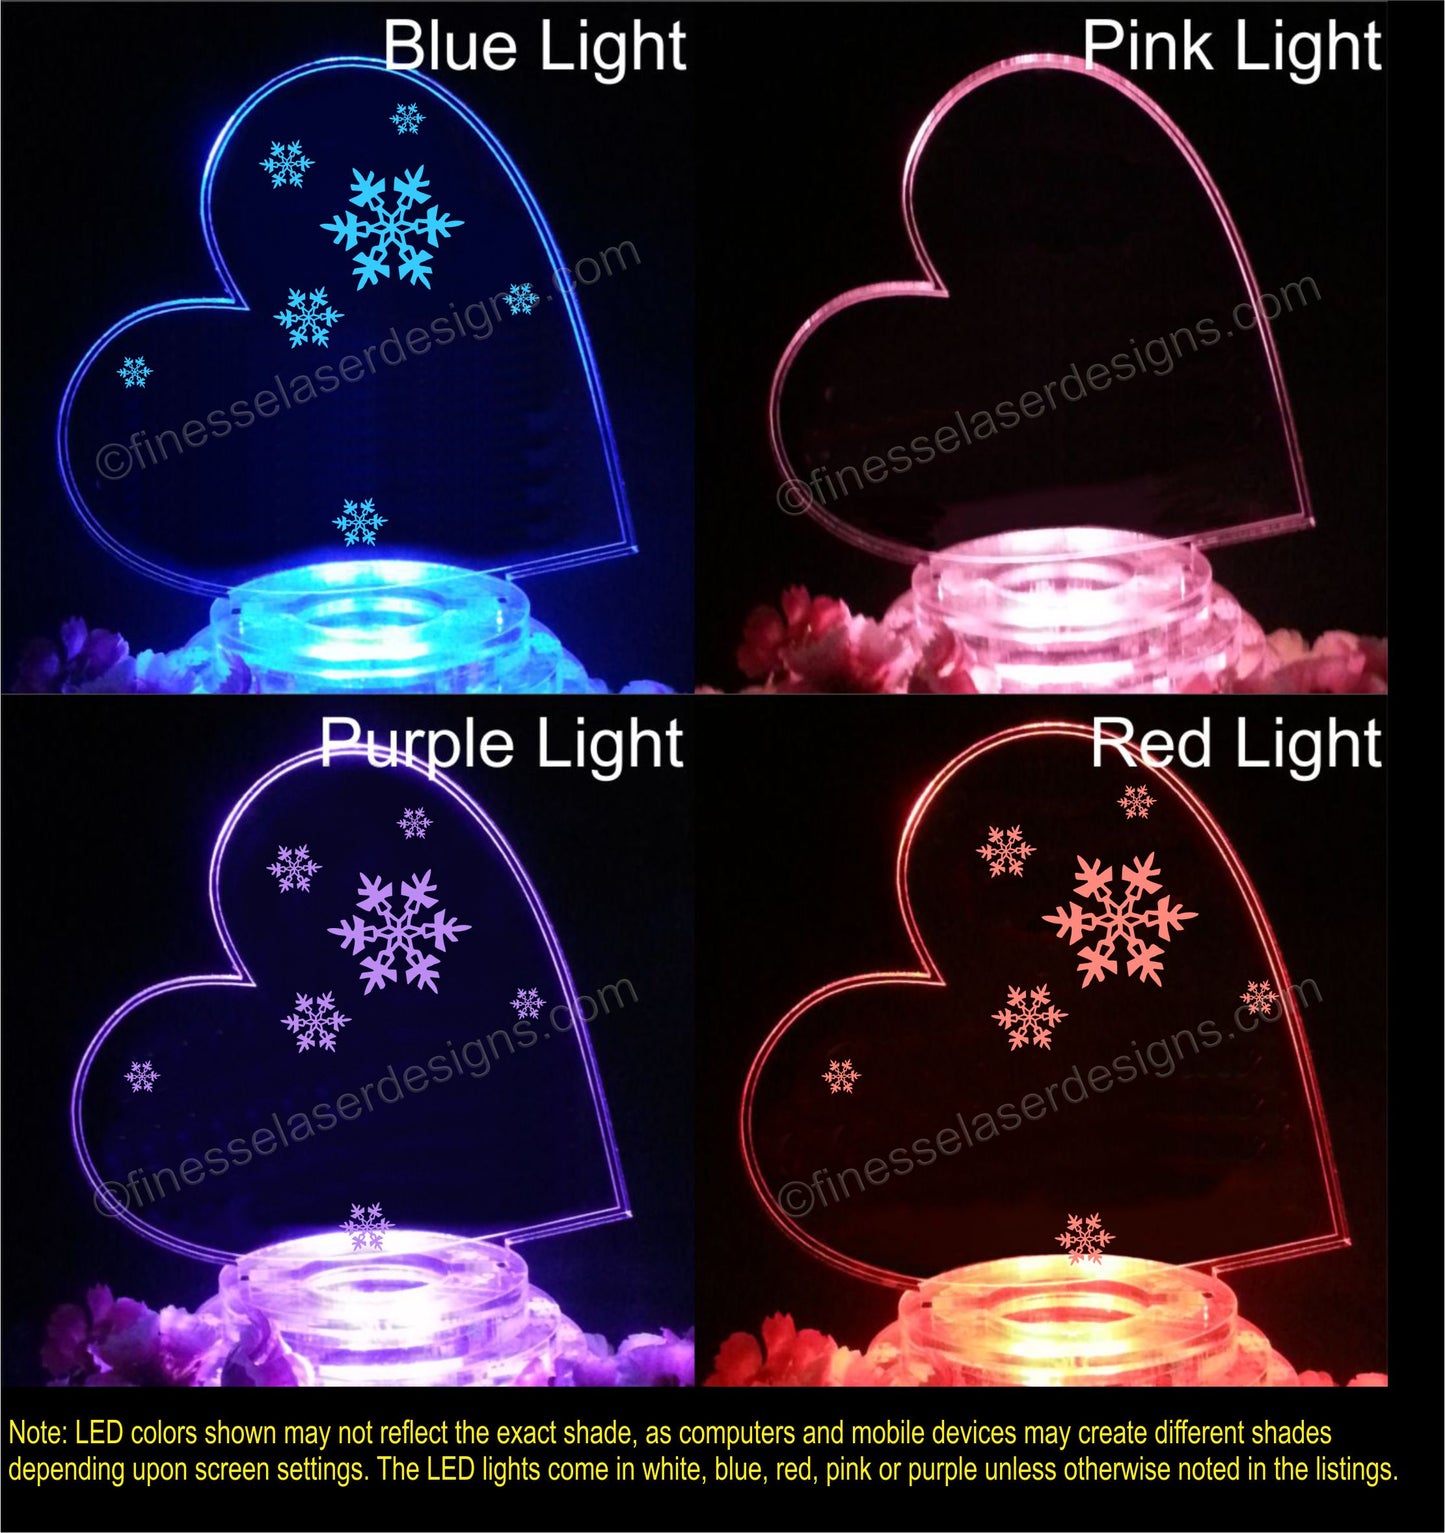 4 colored light views of a side heart shaped cake topper, shown in blue, pink, purple and red lights